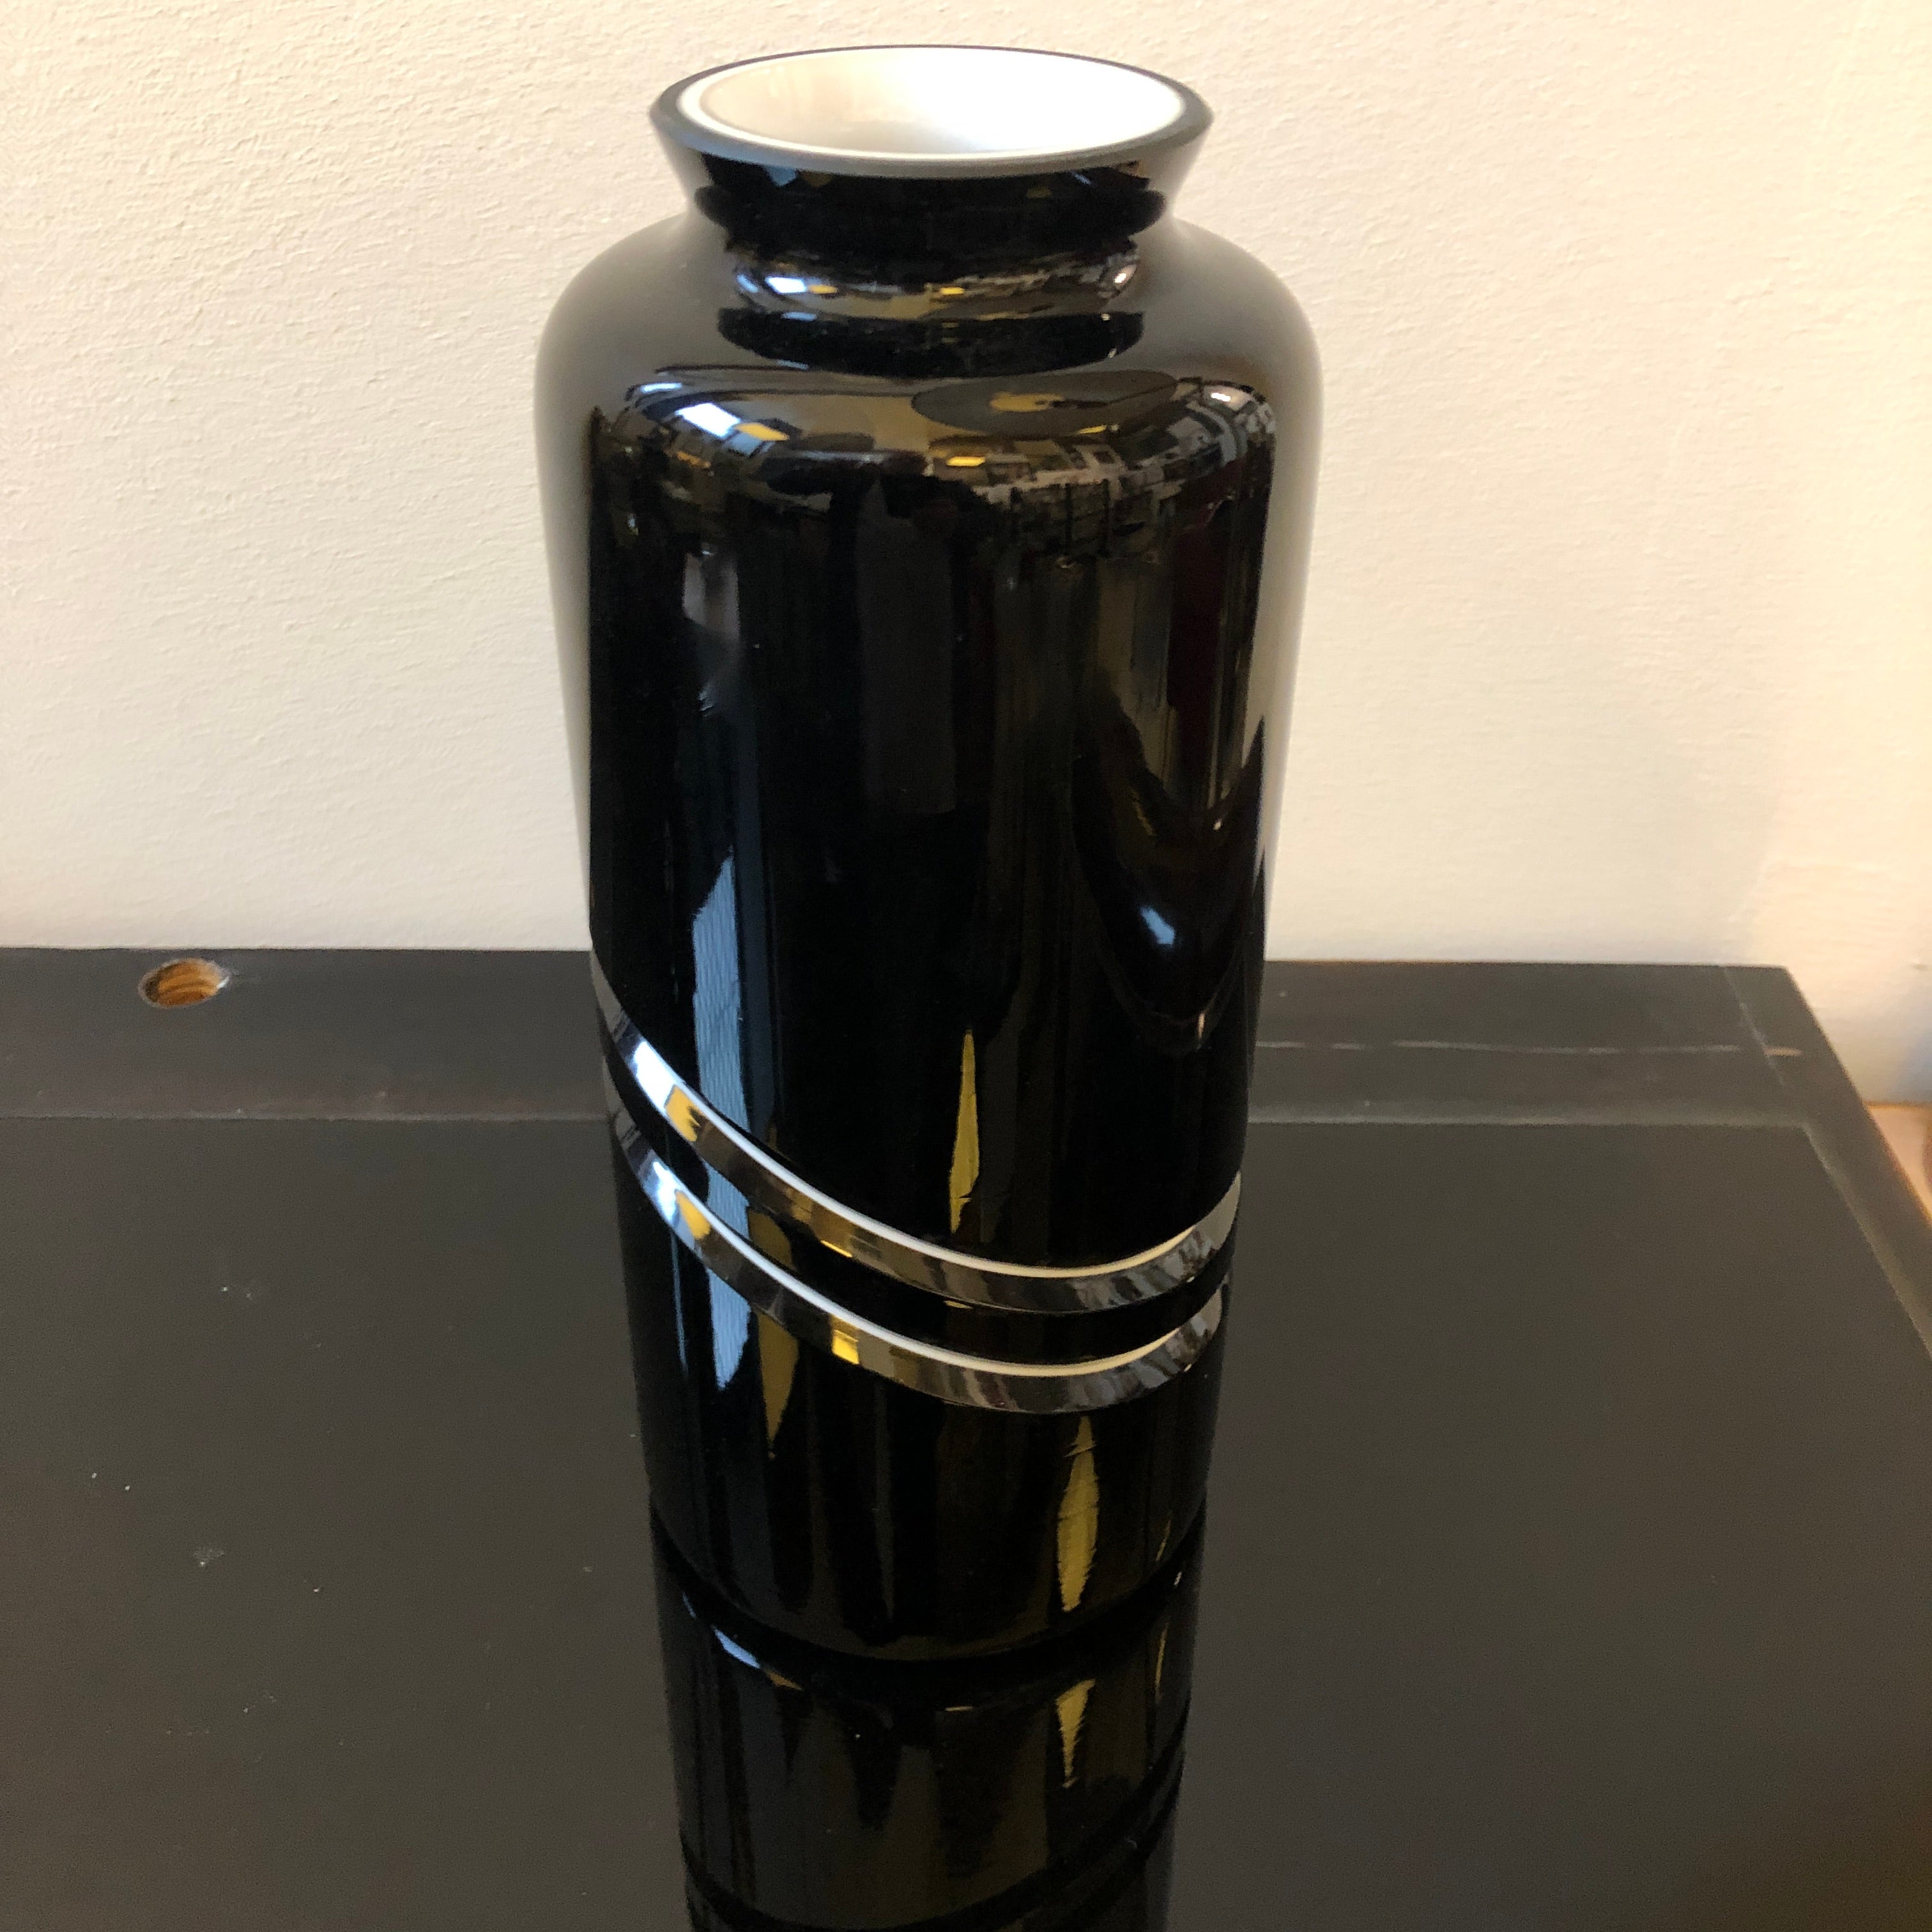 A stylish De Majo Murano glass vase, designed and manufactured in Venice in the 1970s, signed on a side De Majo Murano. It's in perfect conditions.
As a decorative object, the Modernist Black and White Murano Glass Vase by De Majo serves as a